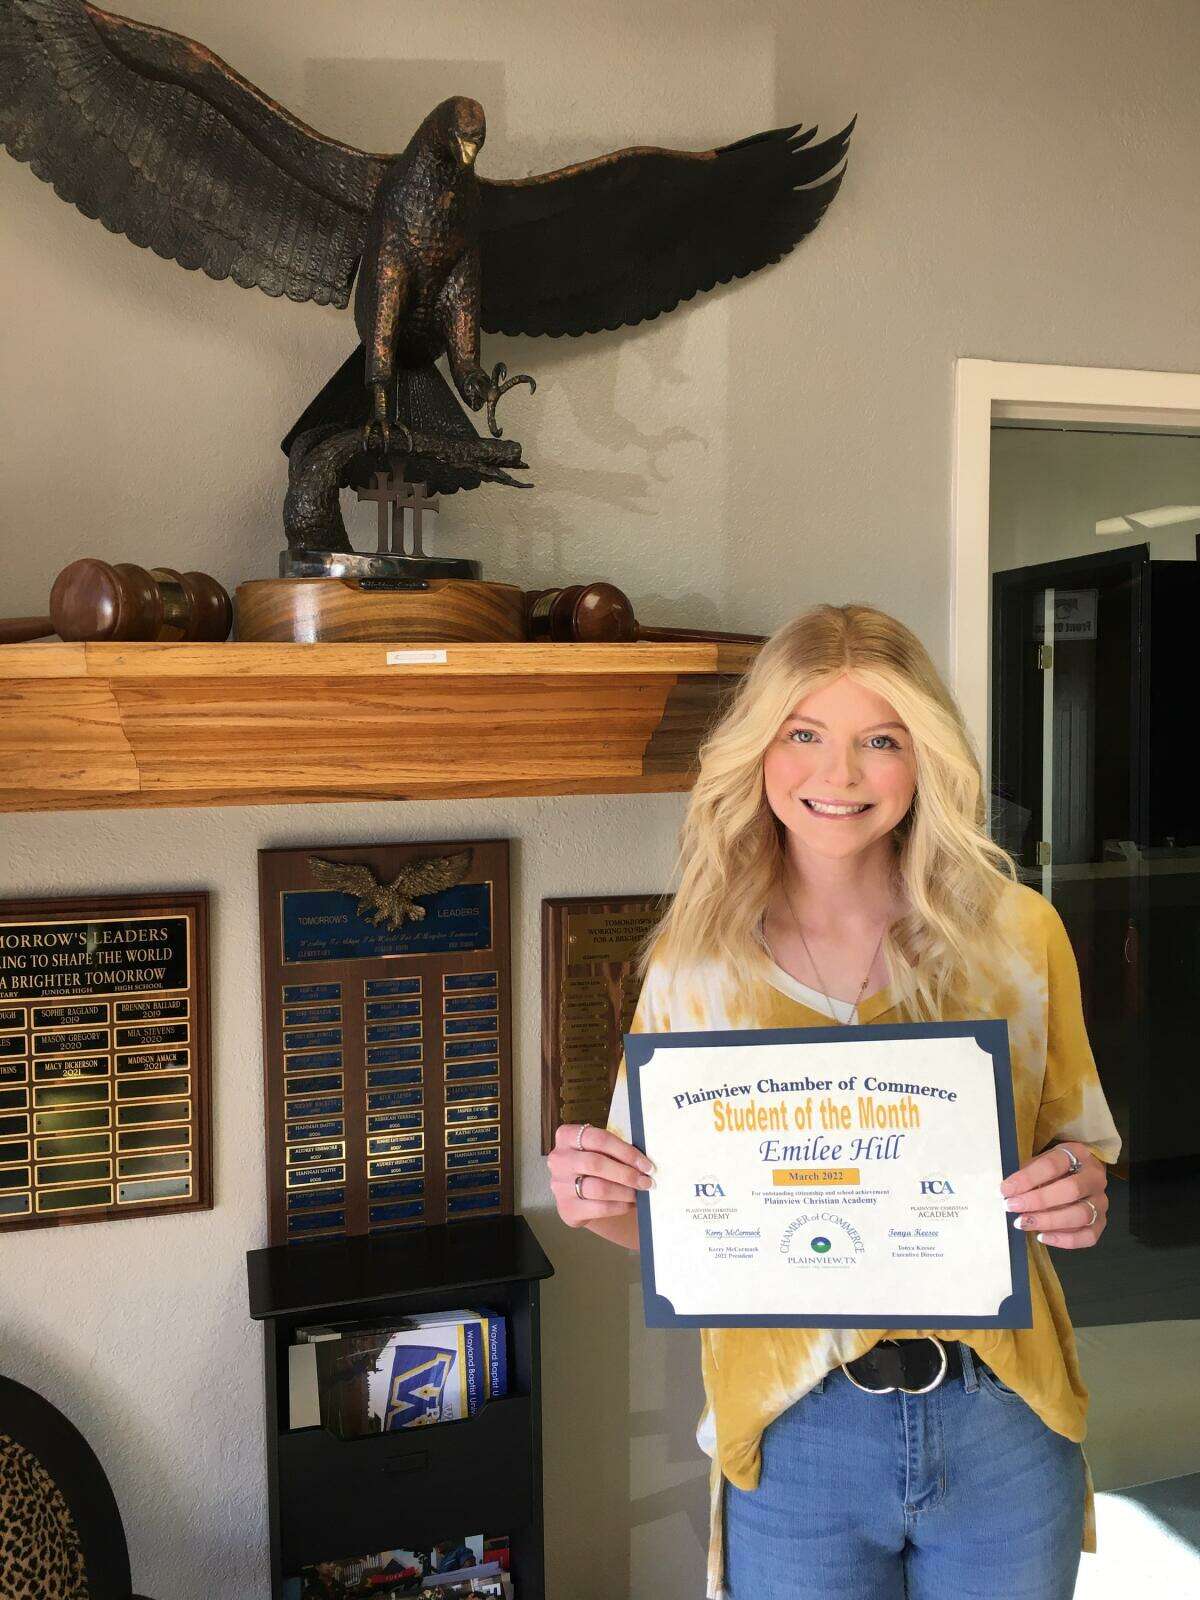 Emilee Hill, a Plainview Christian Academy senior, was chosen as the March 2022 Student of the Month by the Plainview Chamber of Commerce. 